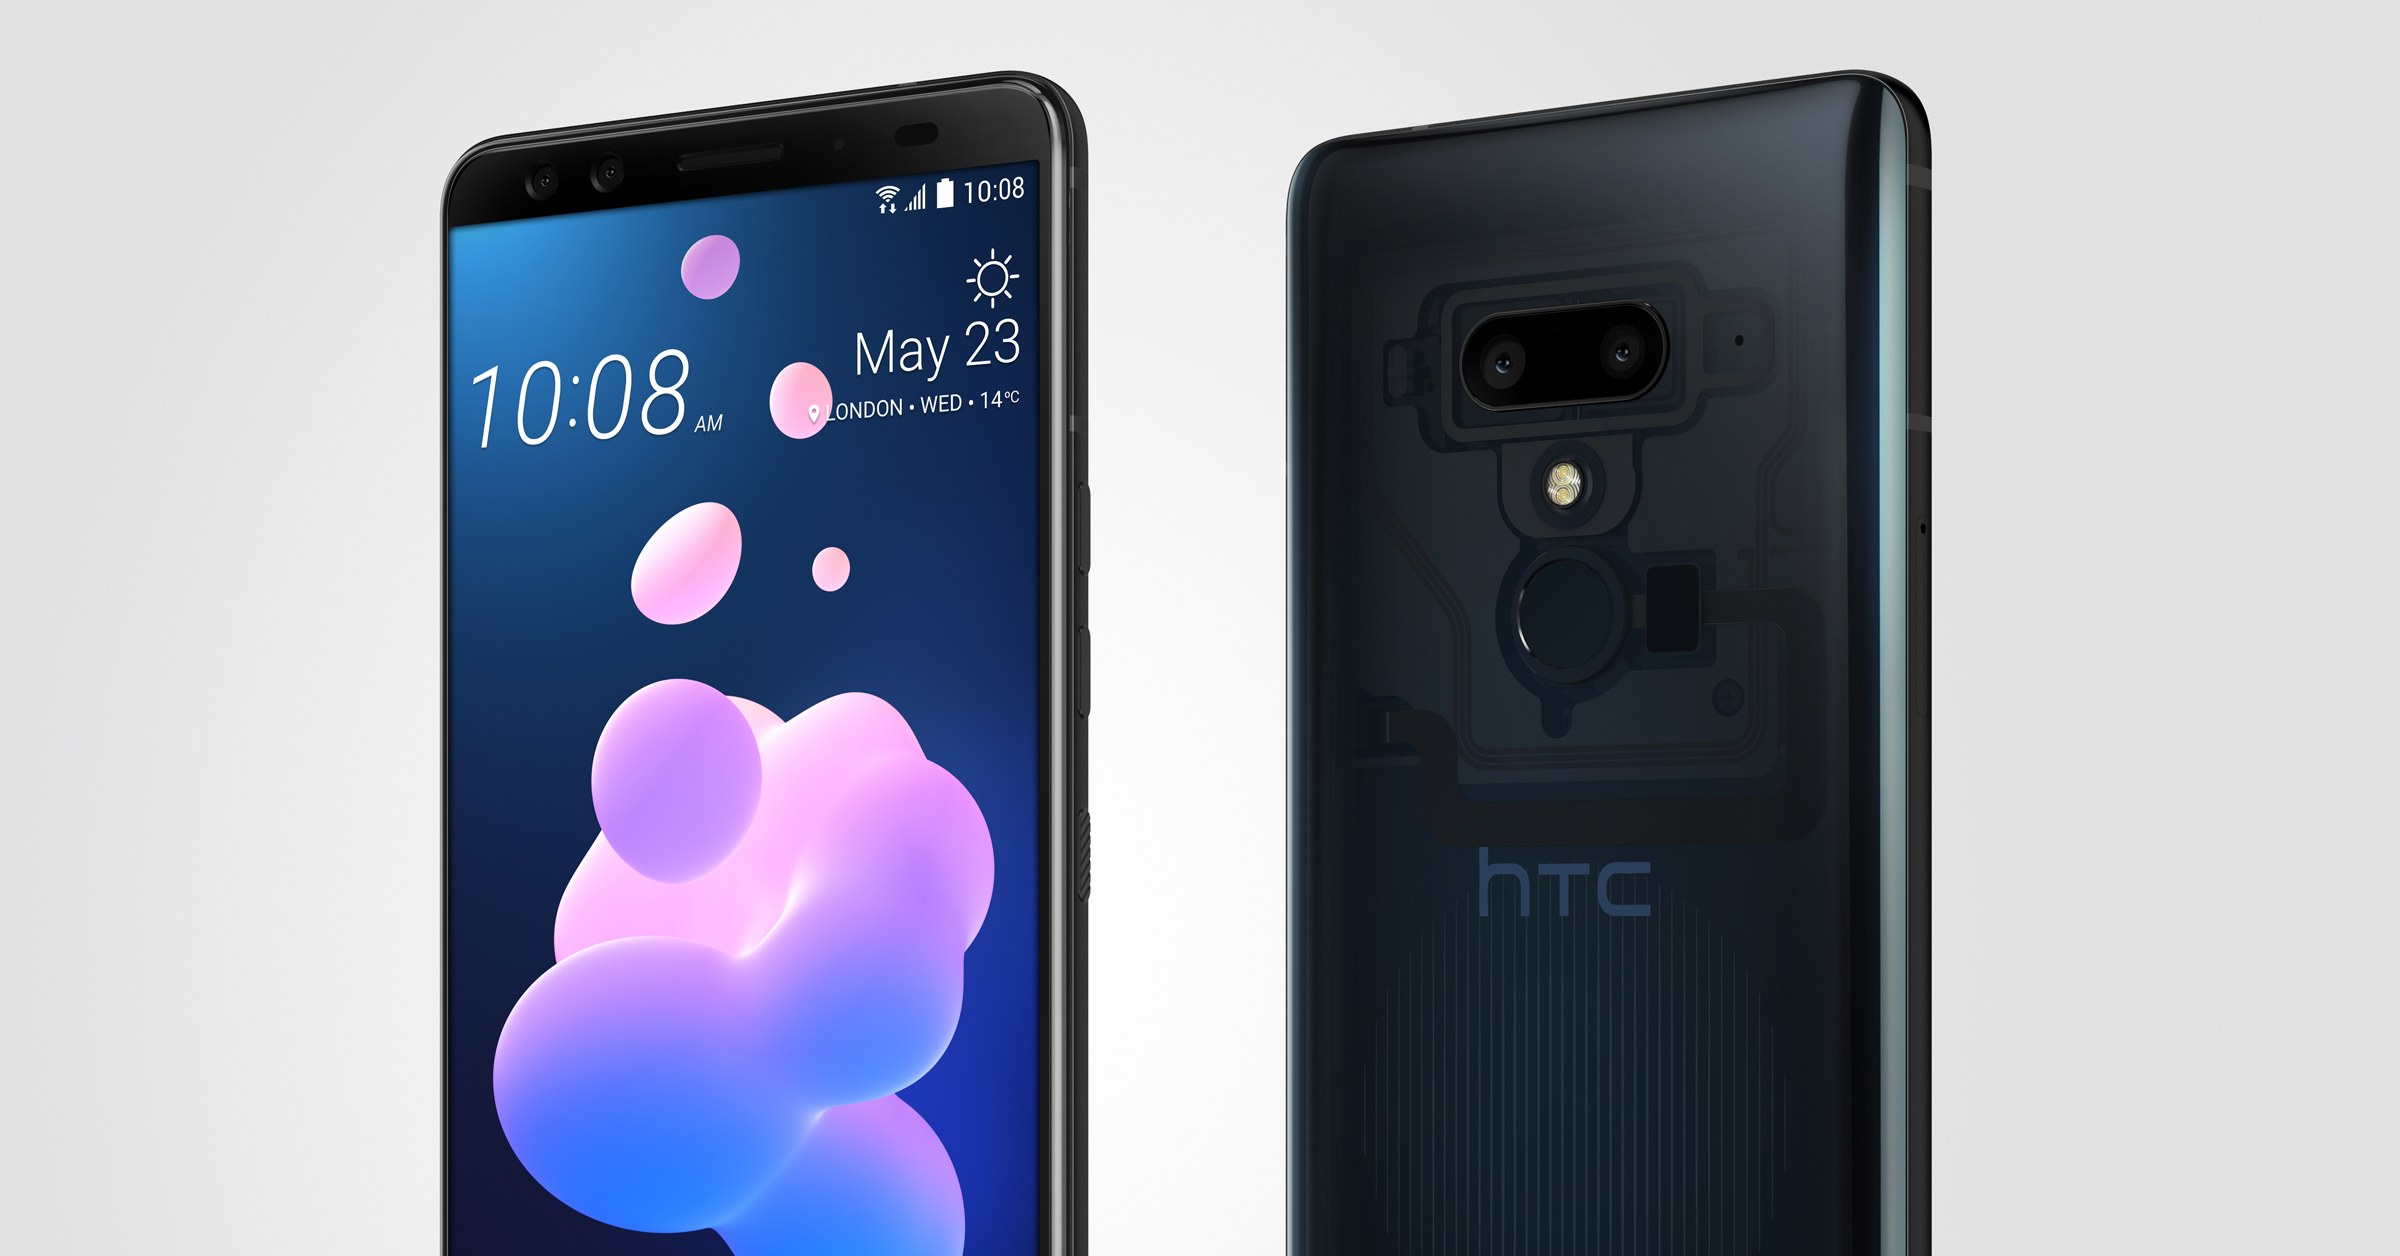 HTC U12+ (US versions) finally getting a bump to Android Pie